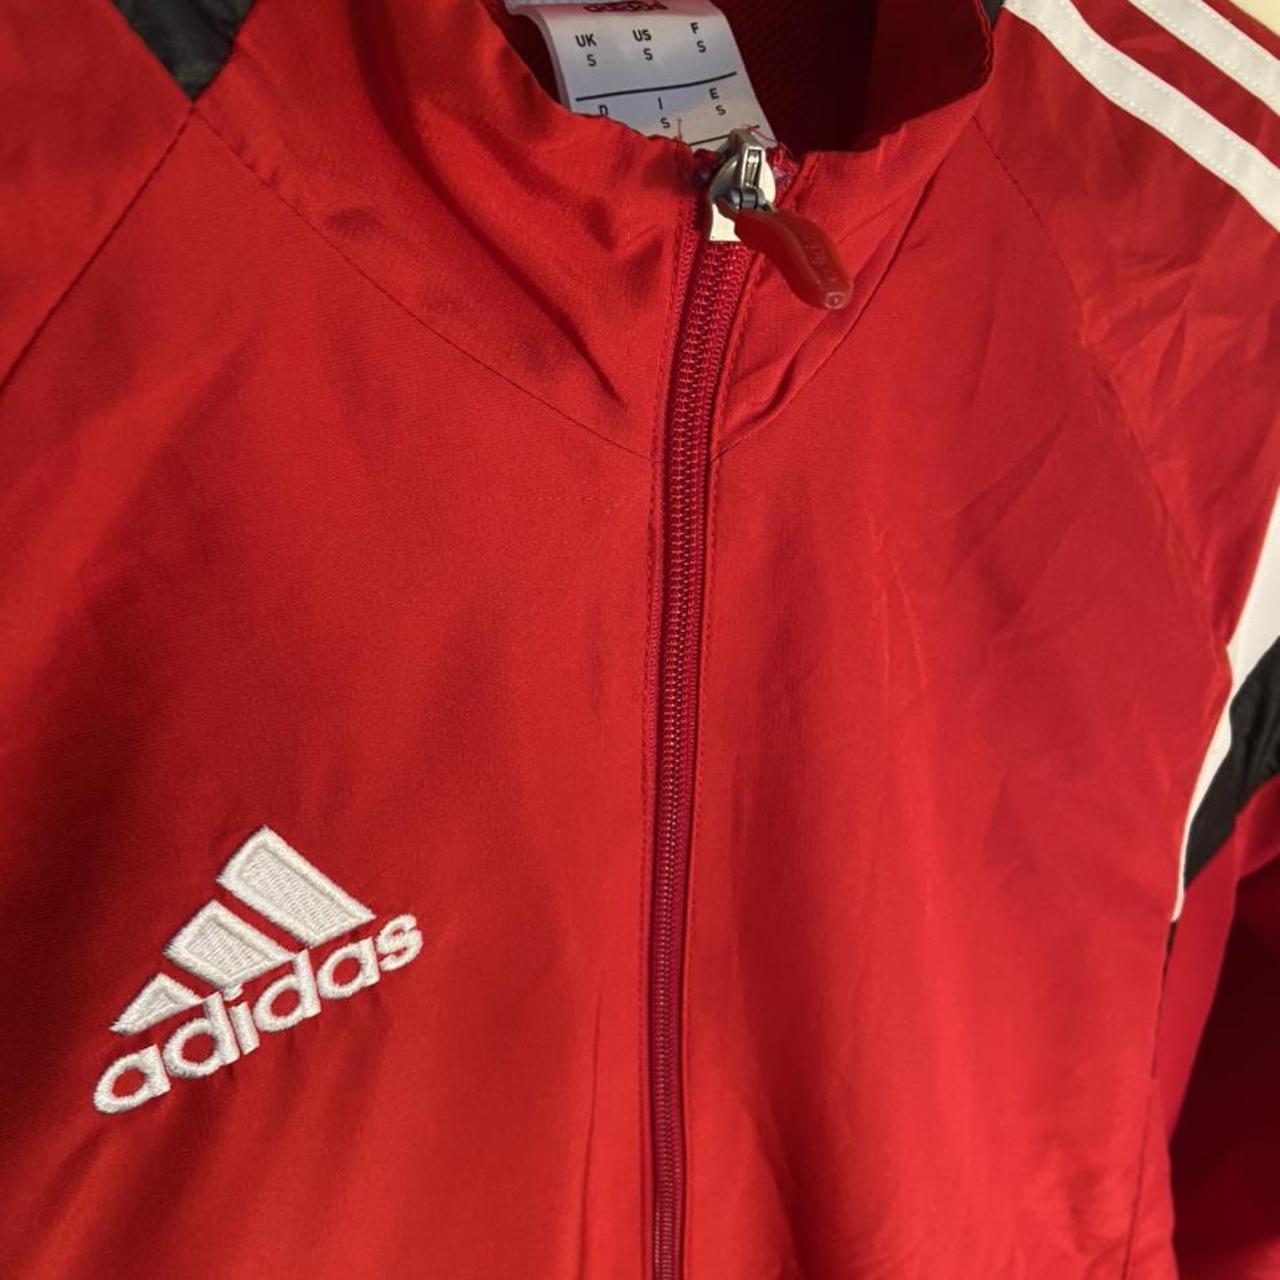 Vintage Adidas Track Jacket In Red with White and... - Depop